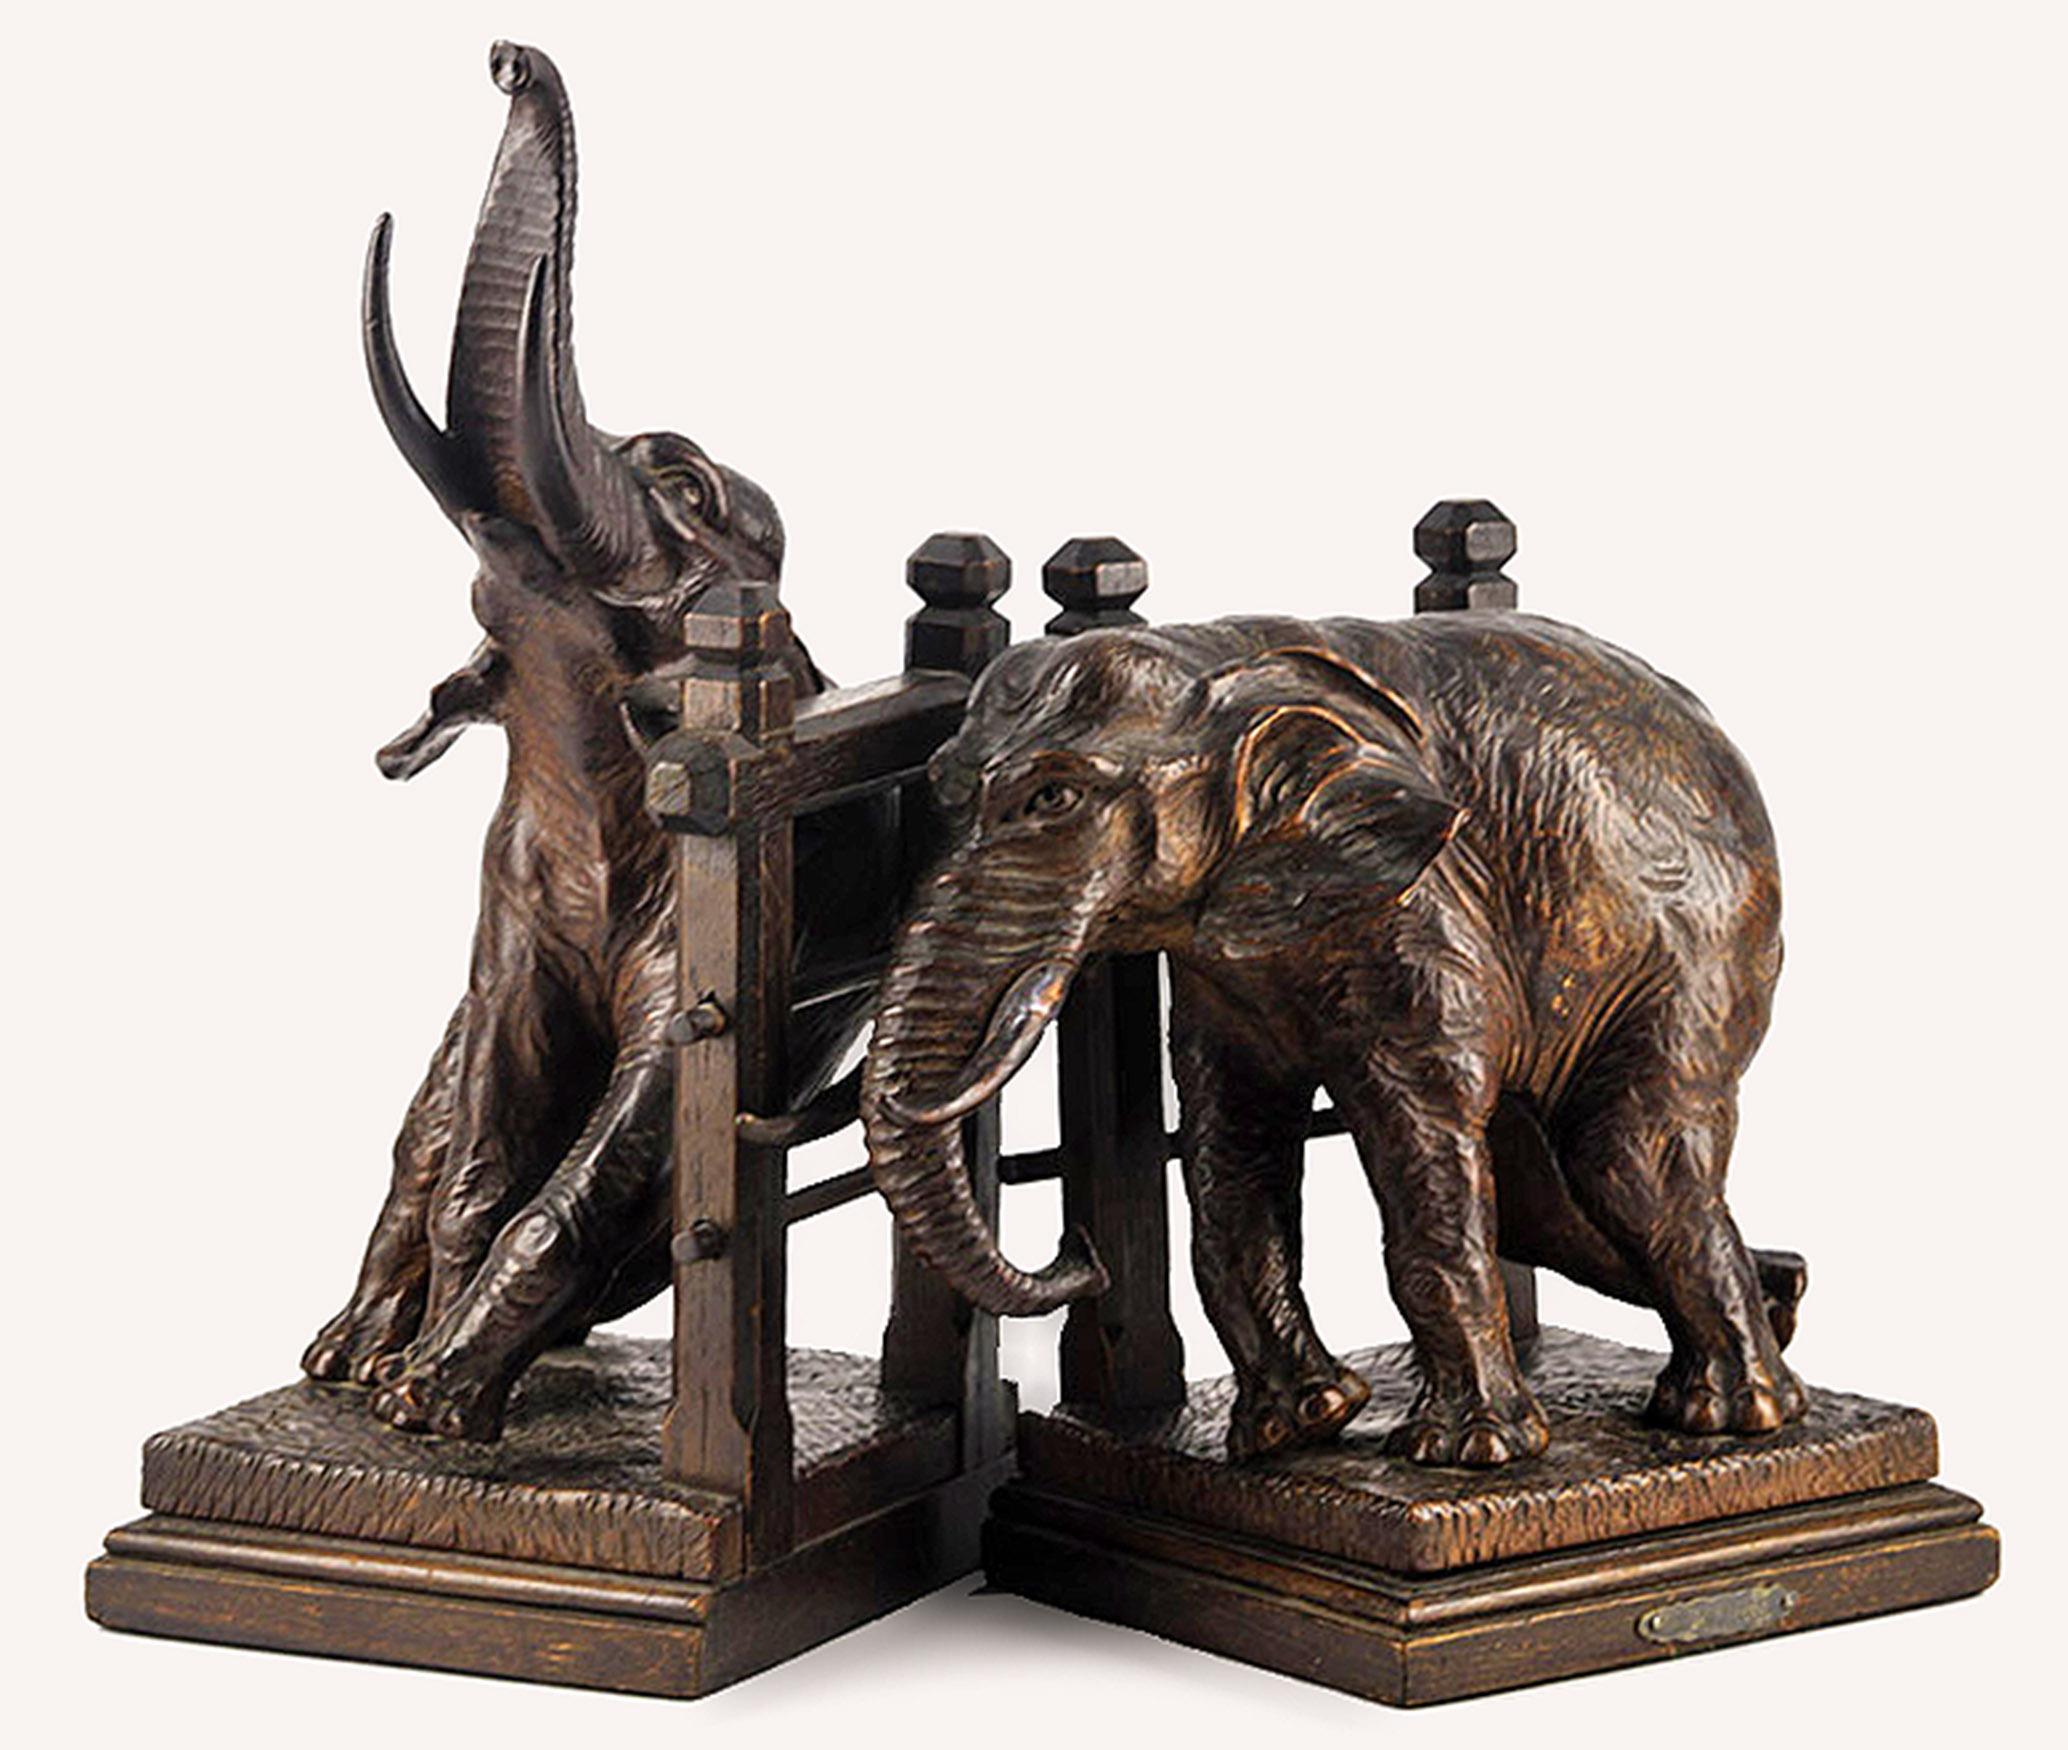 Carved Pair of Early 20th Century Hand-Crafted Wooden Elephant Bookends by Ary Bitter For Sale